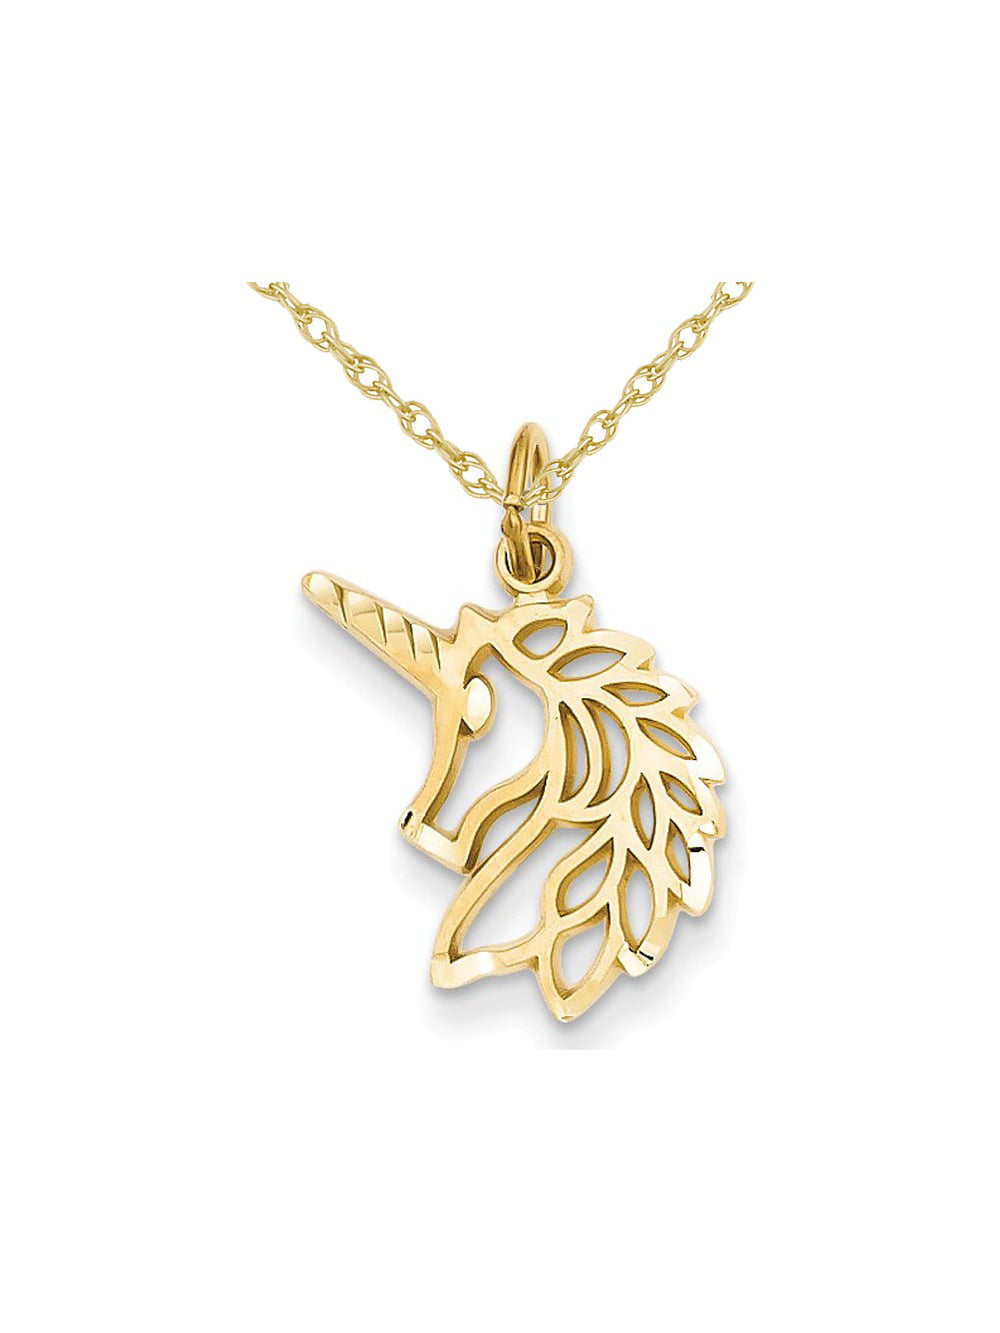 14K Yellow Gold Unicorns Pendant on an Adjustable 14K Yellow Gold Chain Necklace